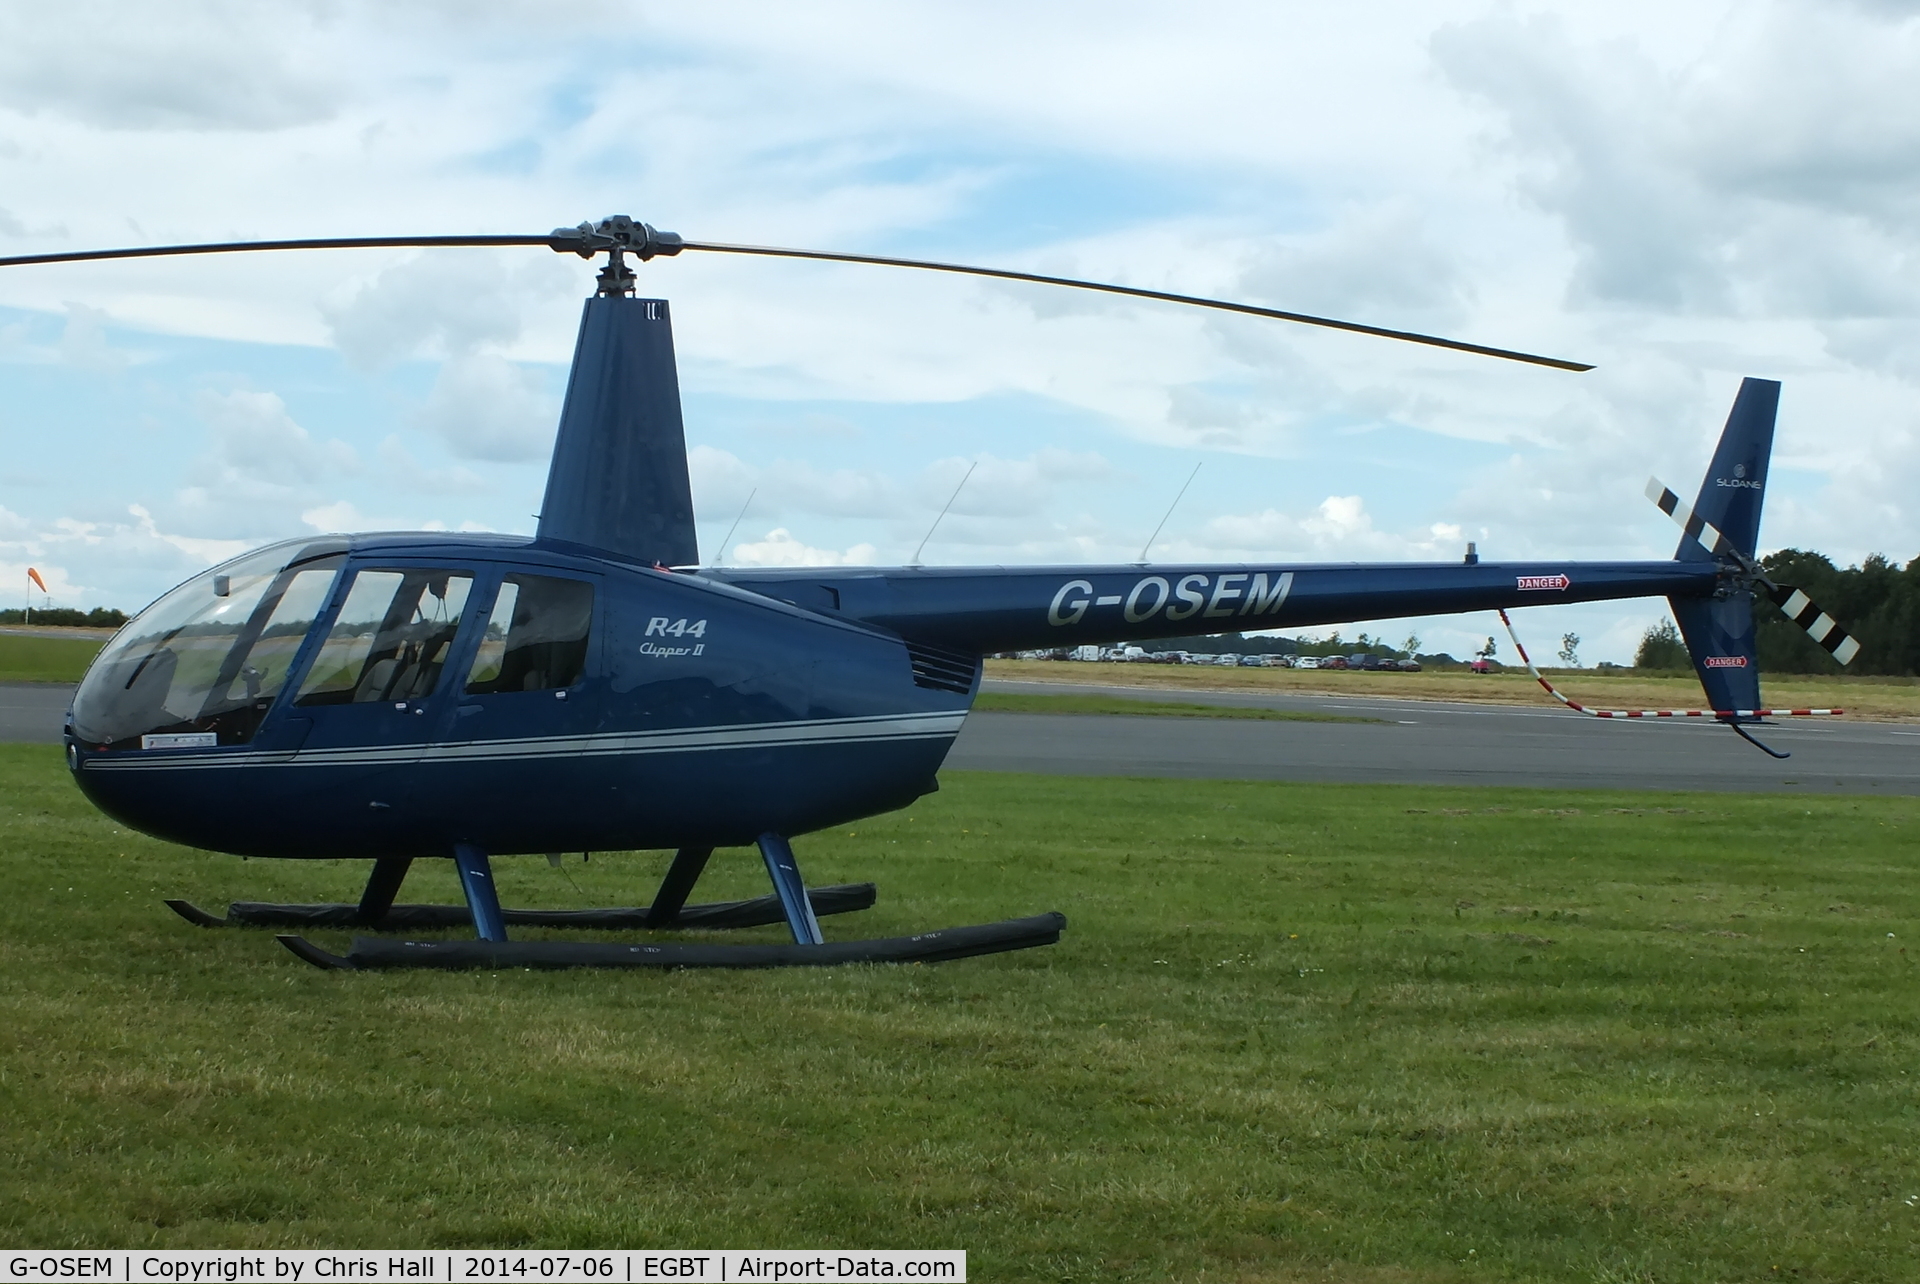 G-OSEM, 2014 Robinson R44 Clipper II C/N 13665, ferrying race fans to the British F1 Grand Prix at Silverstone